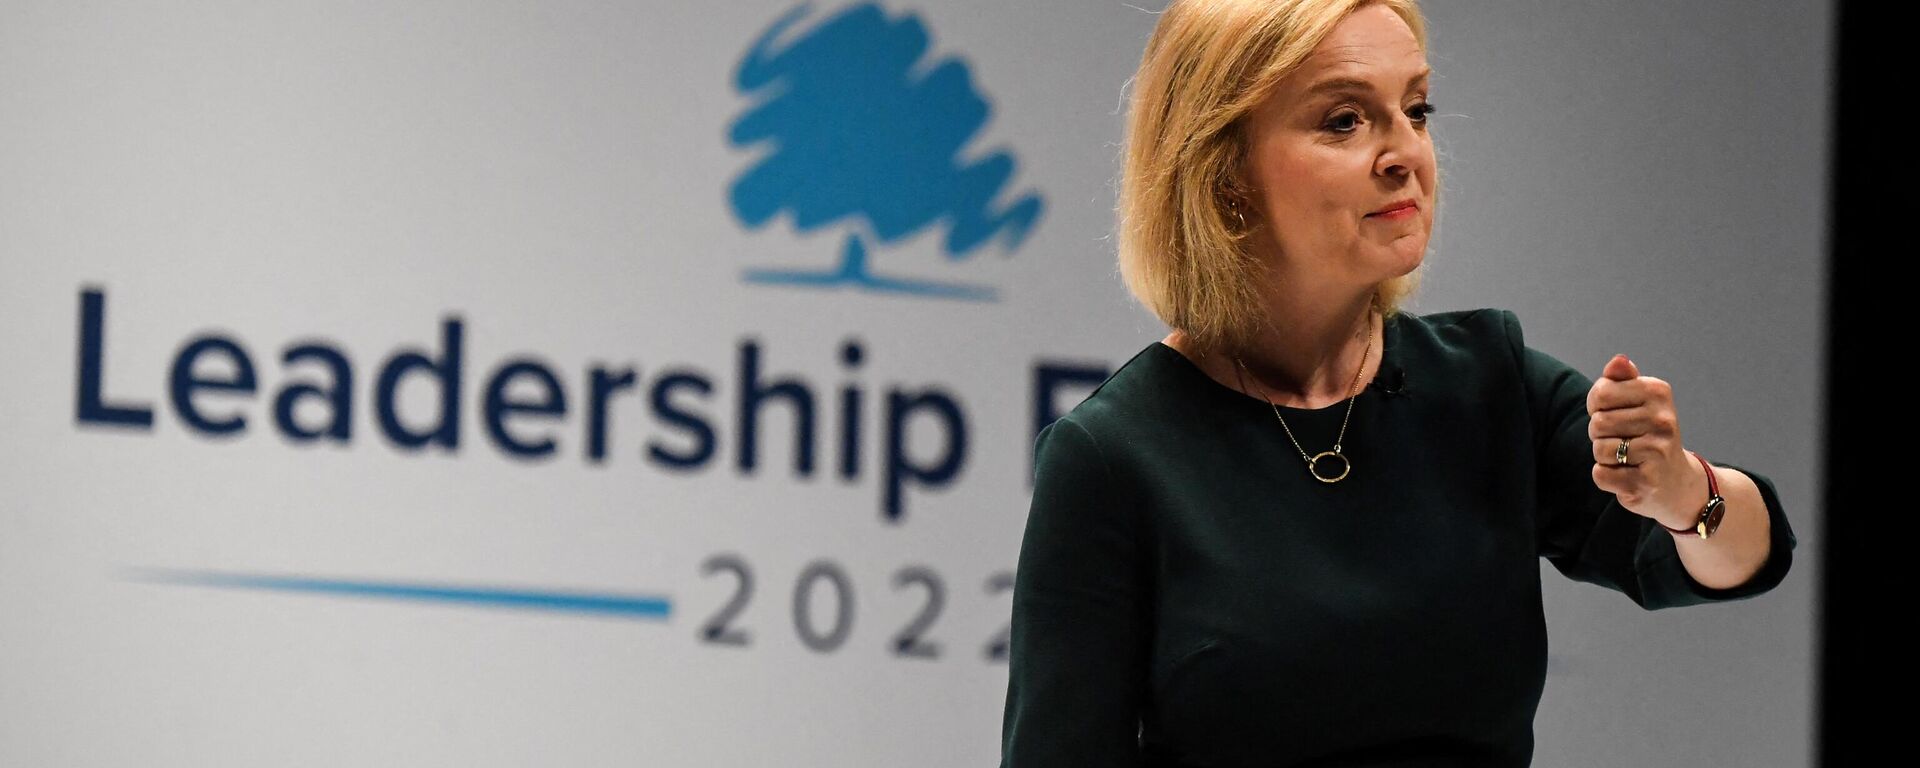 Contender to become the country's next Prime minister and leader of the Conservative party British Foreign Secretary Liz Truss speaks during a Conservative Party Hustings event in Perth, on August 16, 2022 - Sputnik International, 1920, 06.09.2022